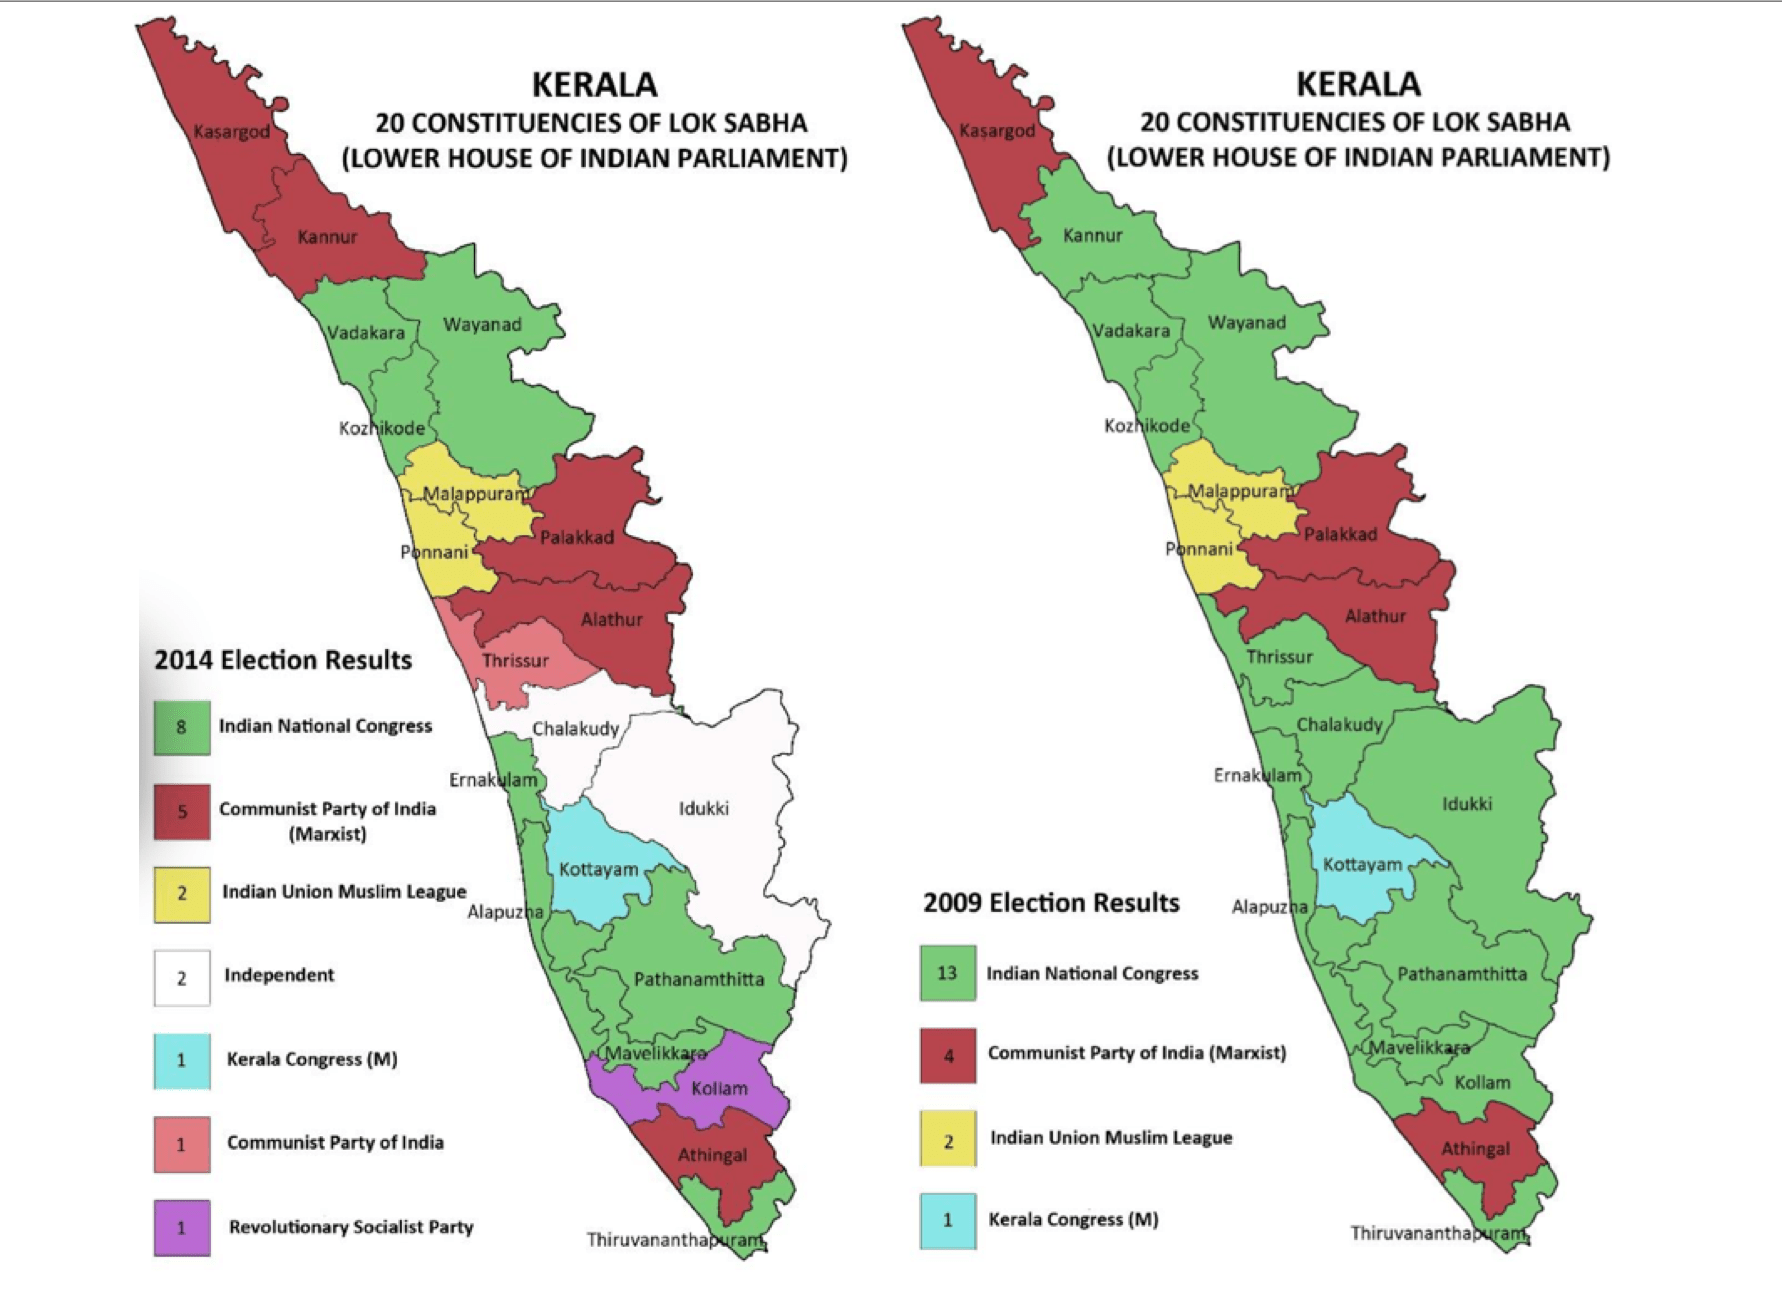 Kerala's Map / Kerala State S Facts In Depth Details Upsc Diligent Ias, Typographic map of kerala, india. indian state map print. indian map. custom map poster